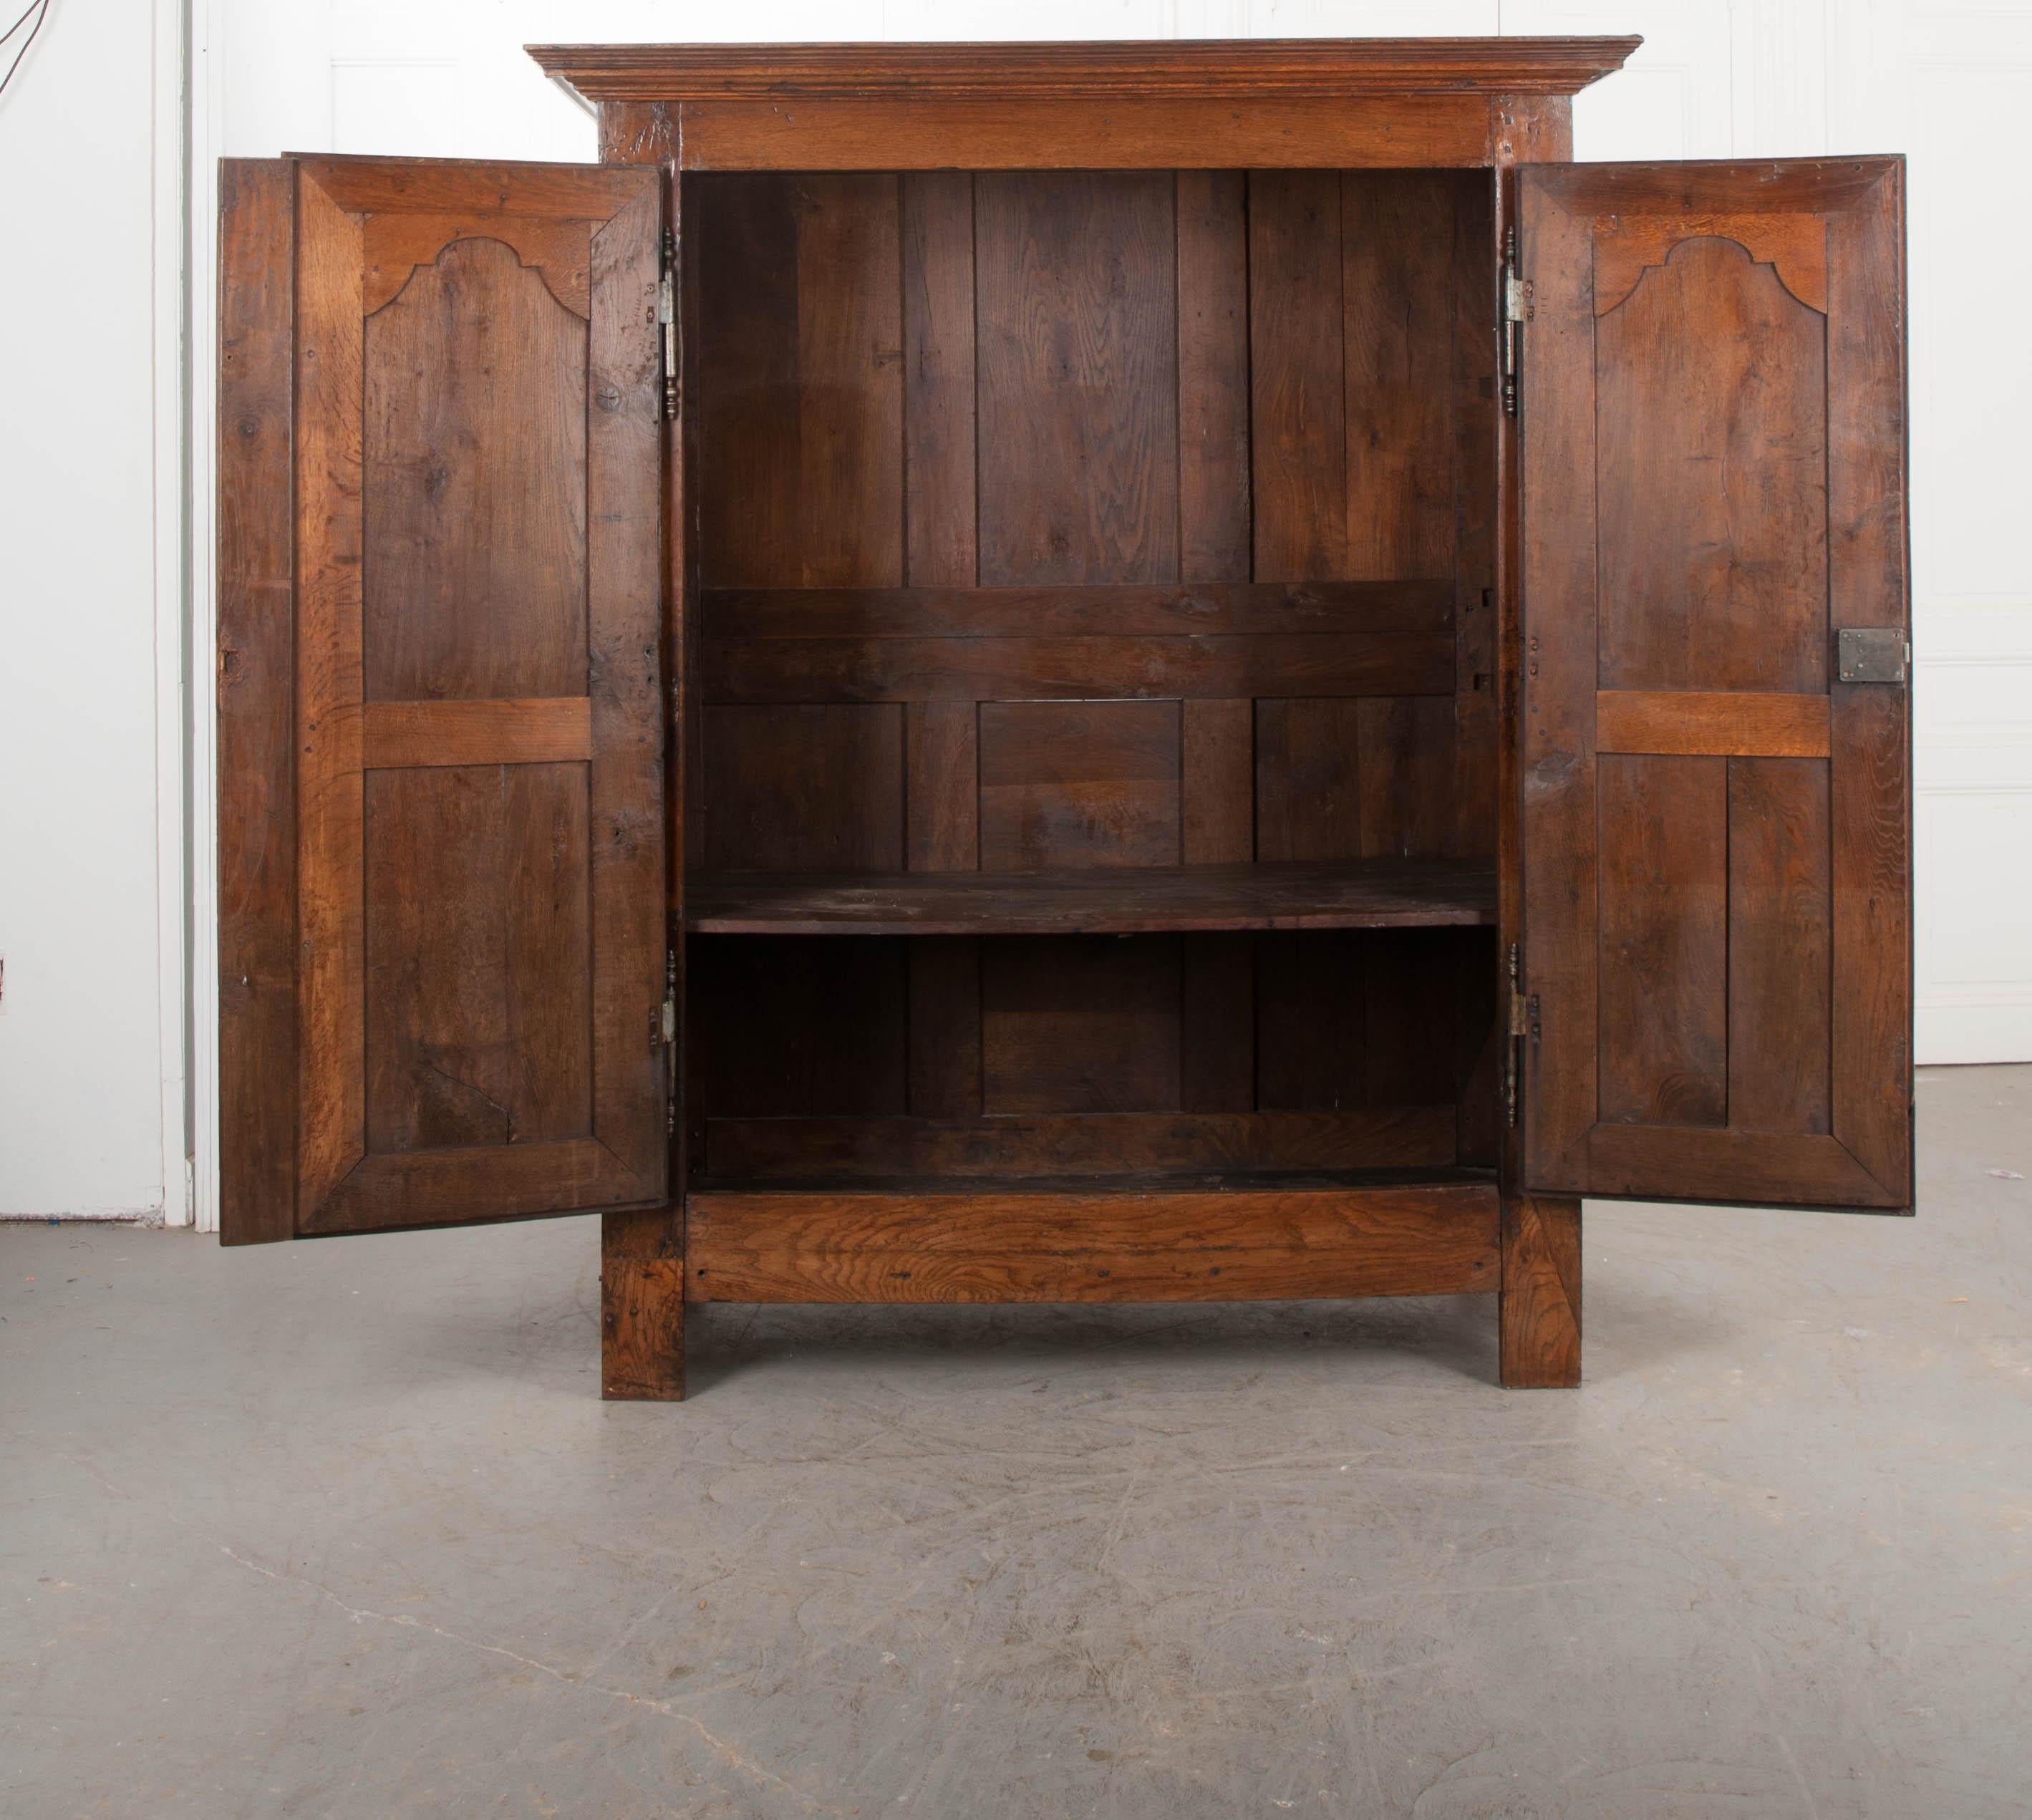 This handsome Louis XIII-style armoire, circa 1820, is from France and features boldly-carved and beautifully grained oak with a deep and rich finish. The deeply-paneled doors bear hand-wrought steel barrel hinges and a single escutcheon, and open